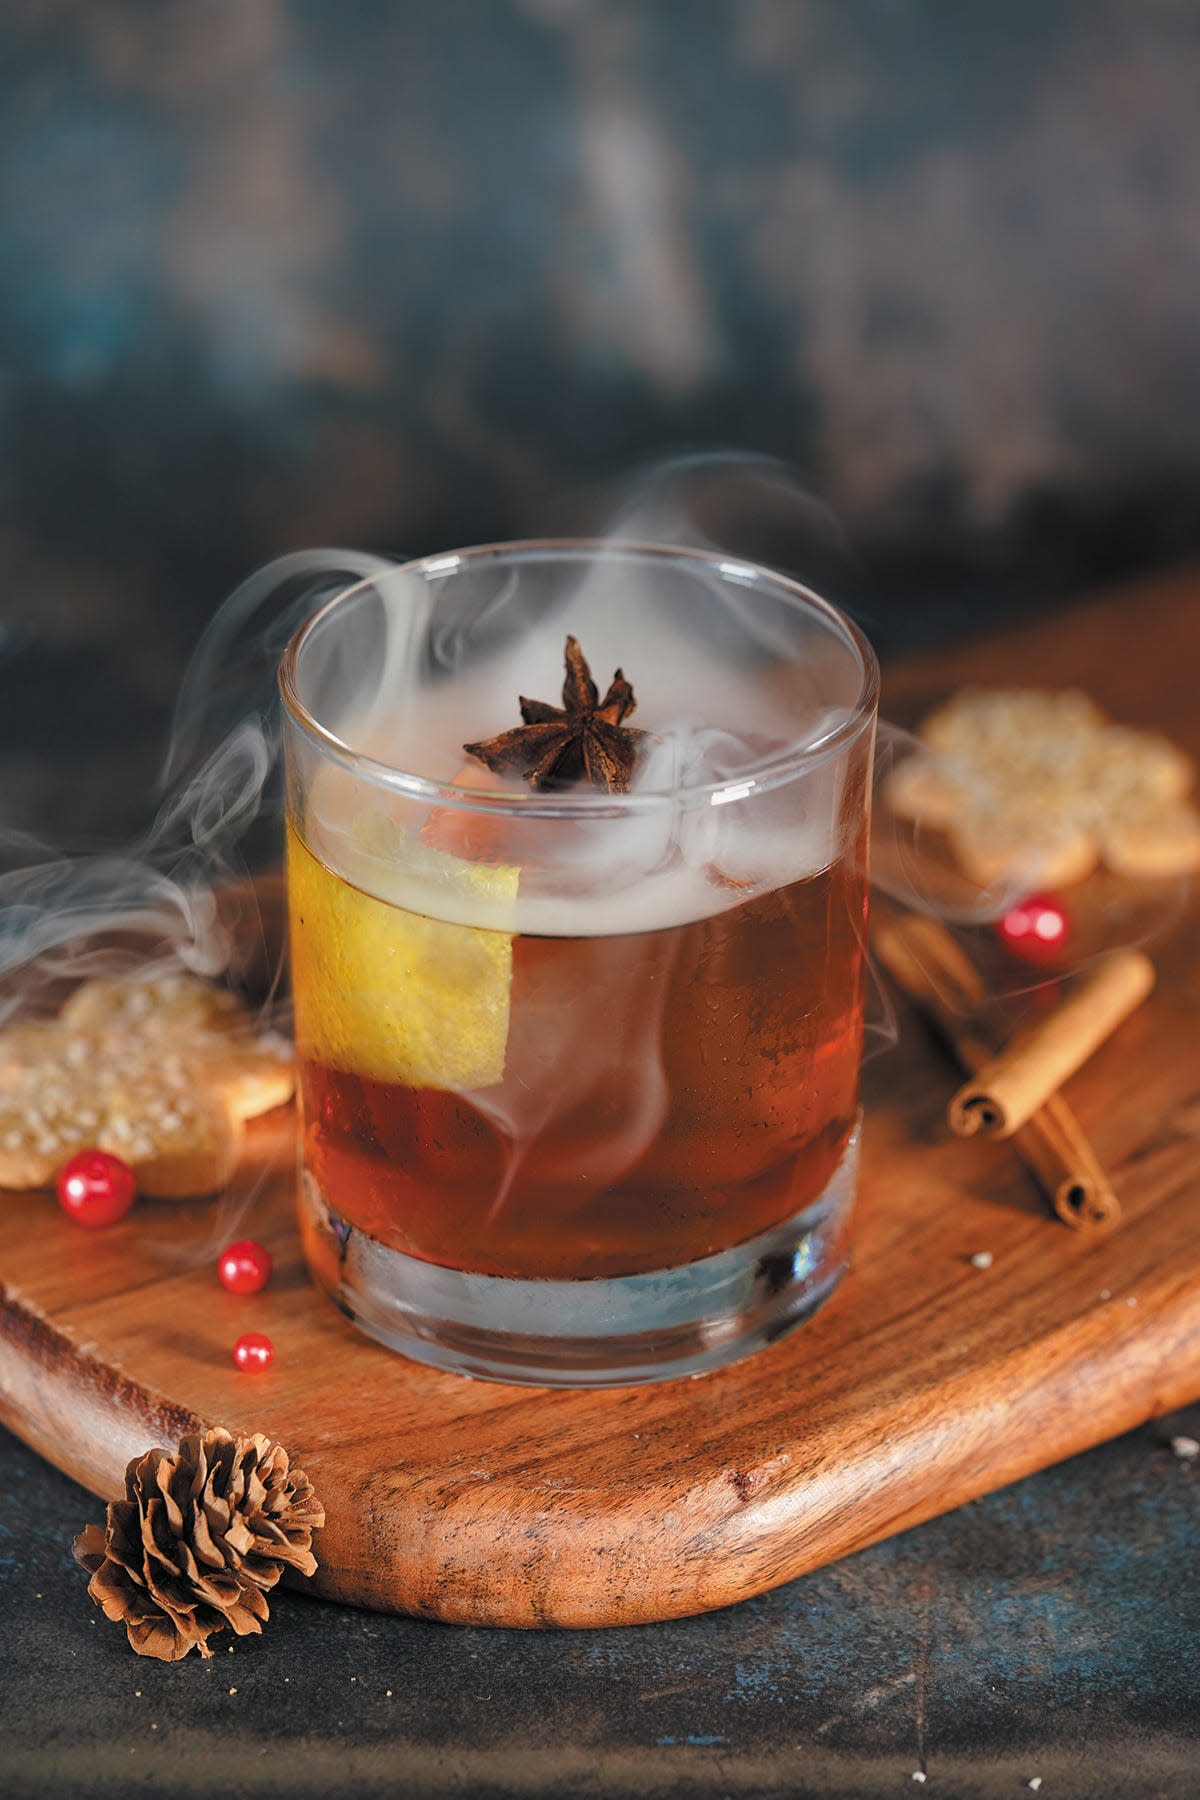 Celebrate New Year's Eve at 1000 North and maybe give one of their seasonal cocktails a try like this fireside old fashion.